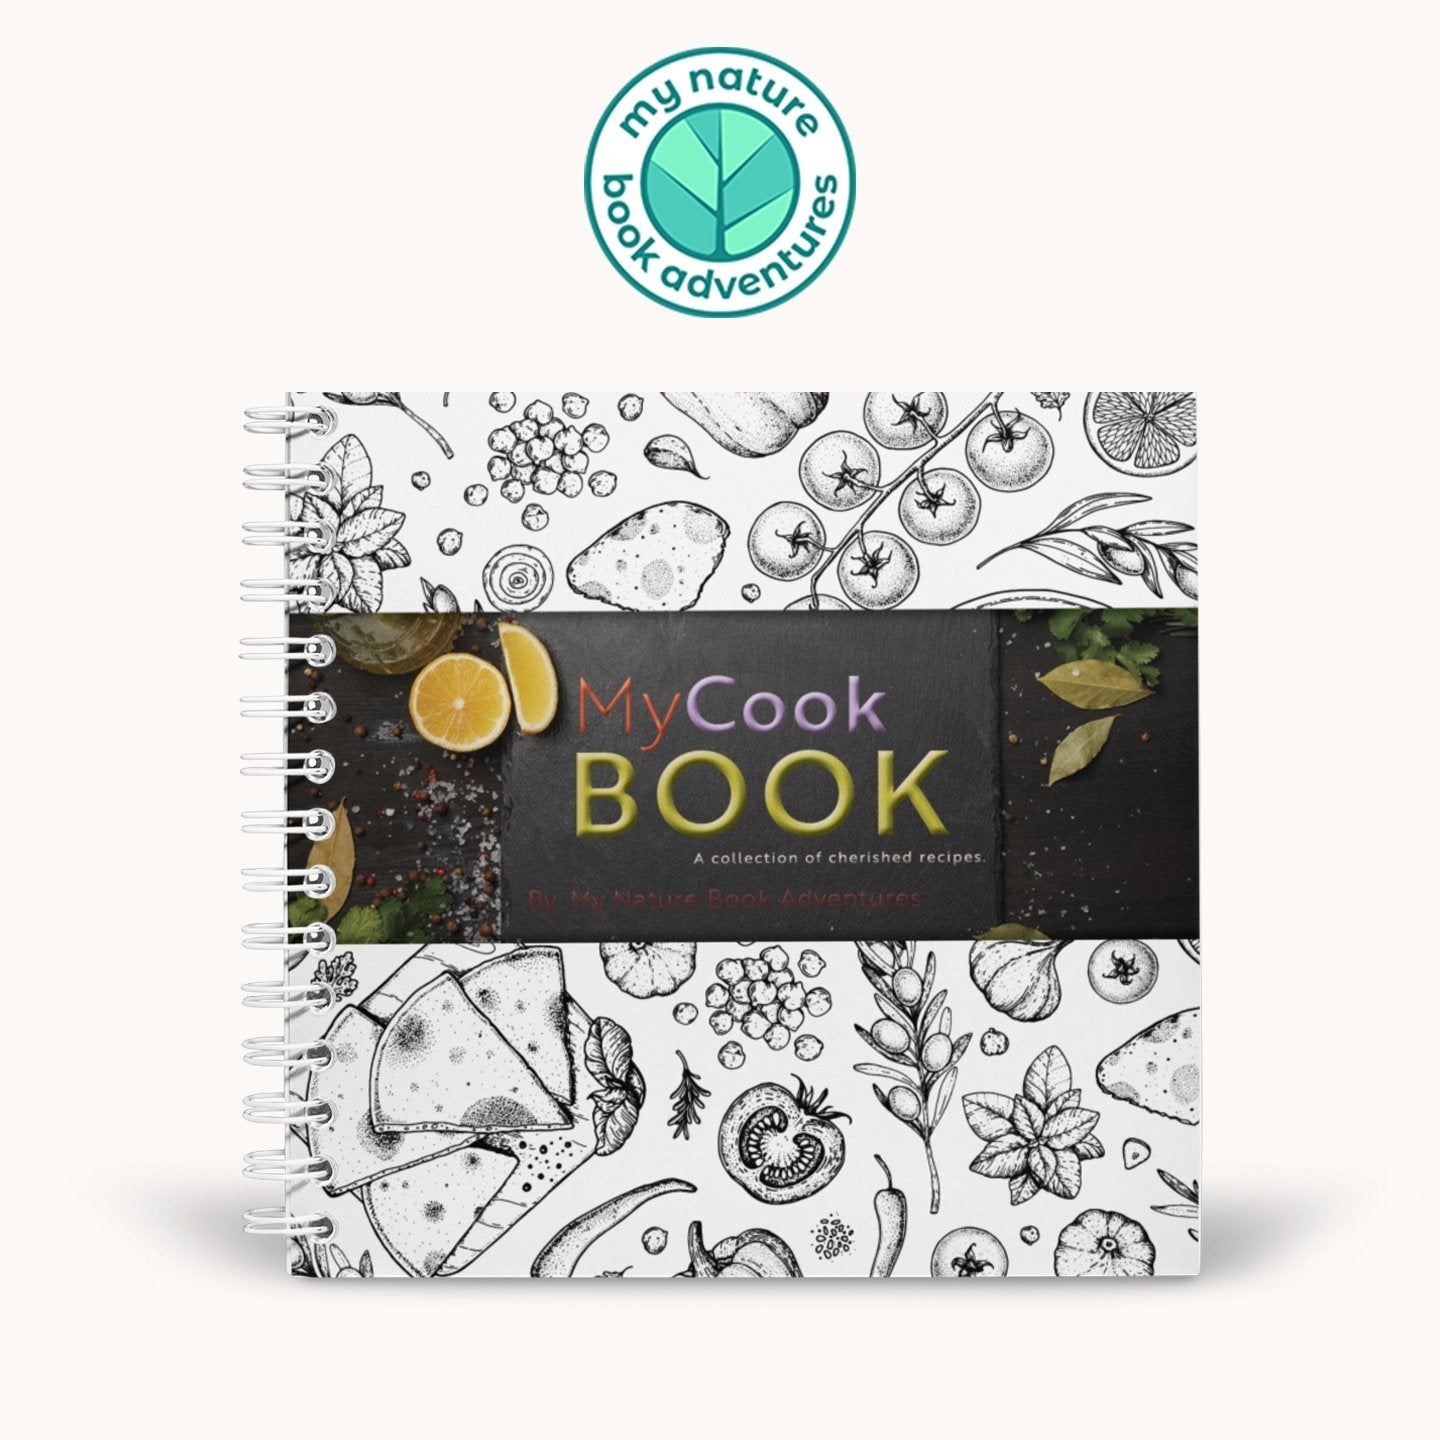 Make Your Own Cookbook or Recipe Book